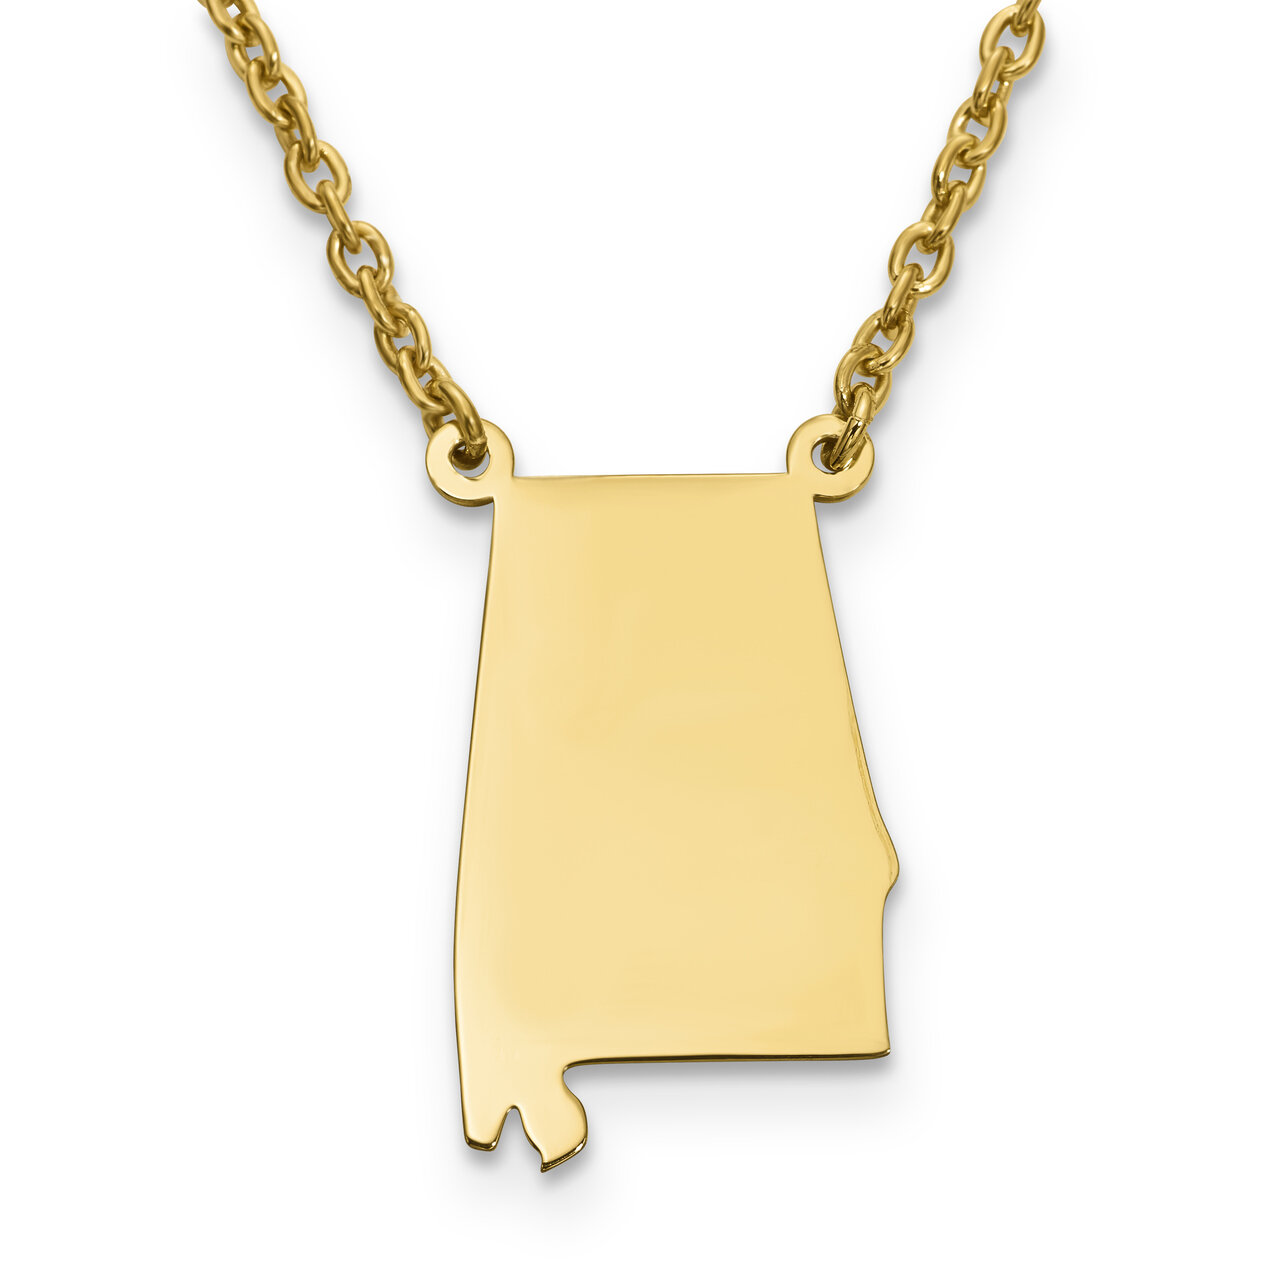 Alabama State Pendant Necklace with Chain 14k Yellow Gold Engravable XNA706Y-AL